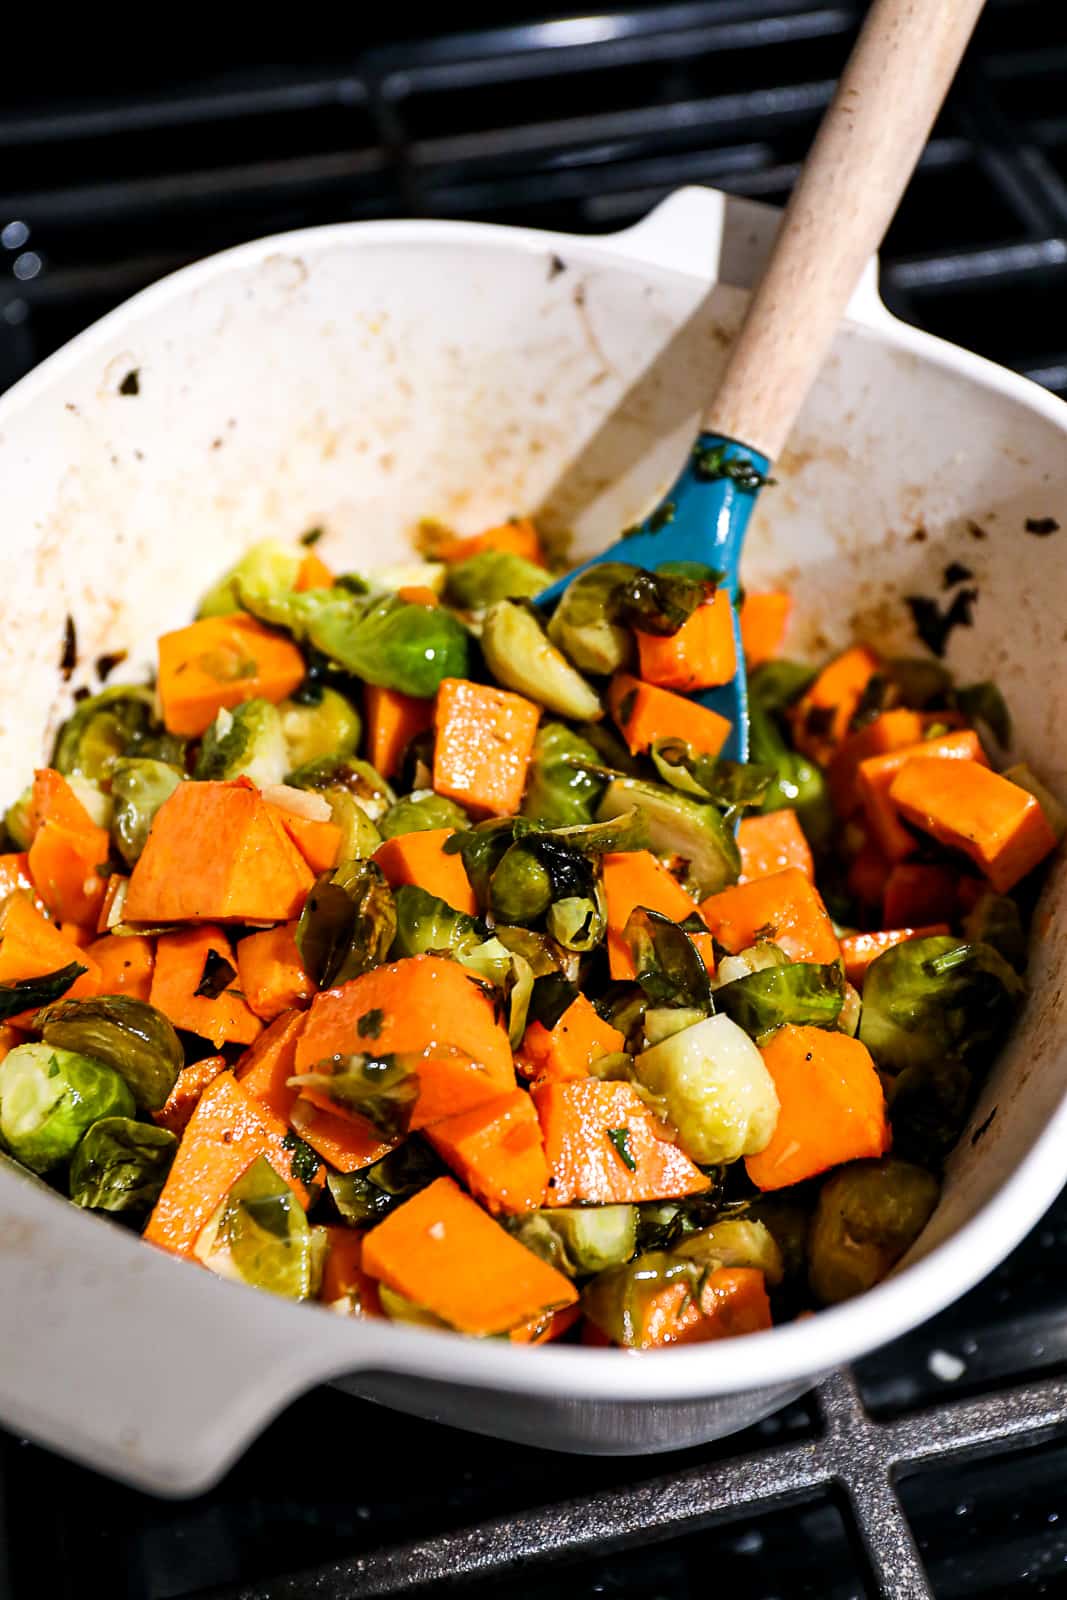 Cooking Brussels Sprouts With Sweet Potatoes in oven